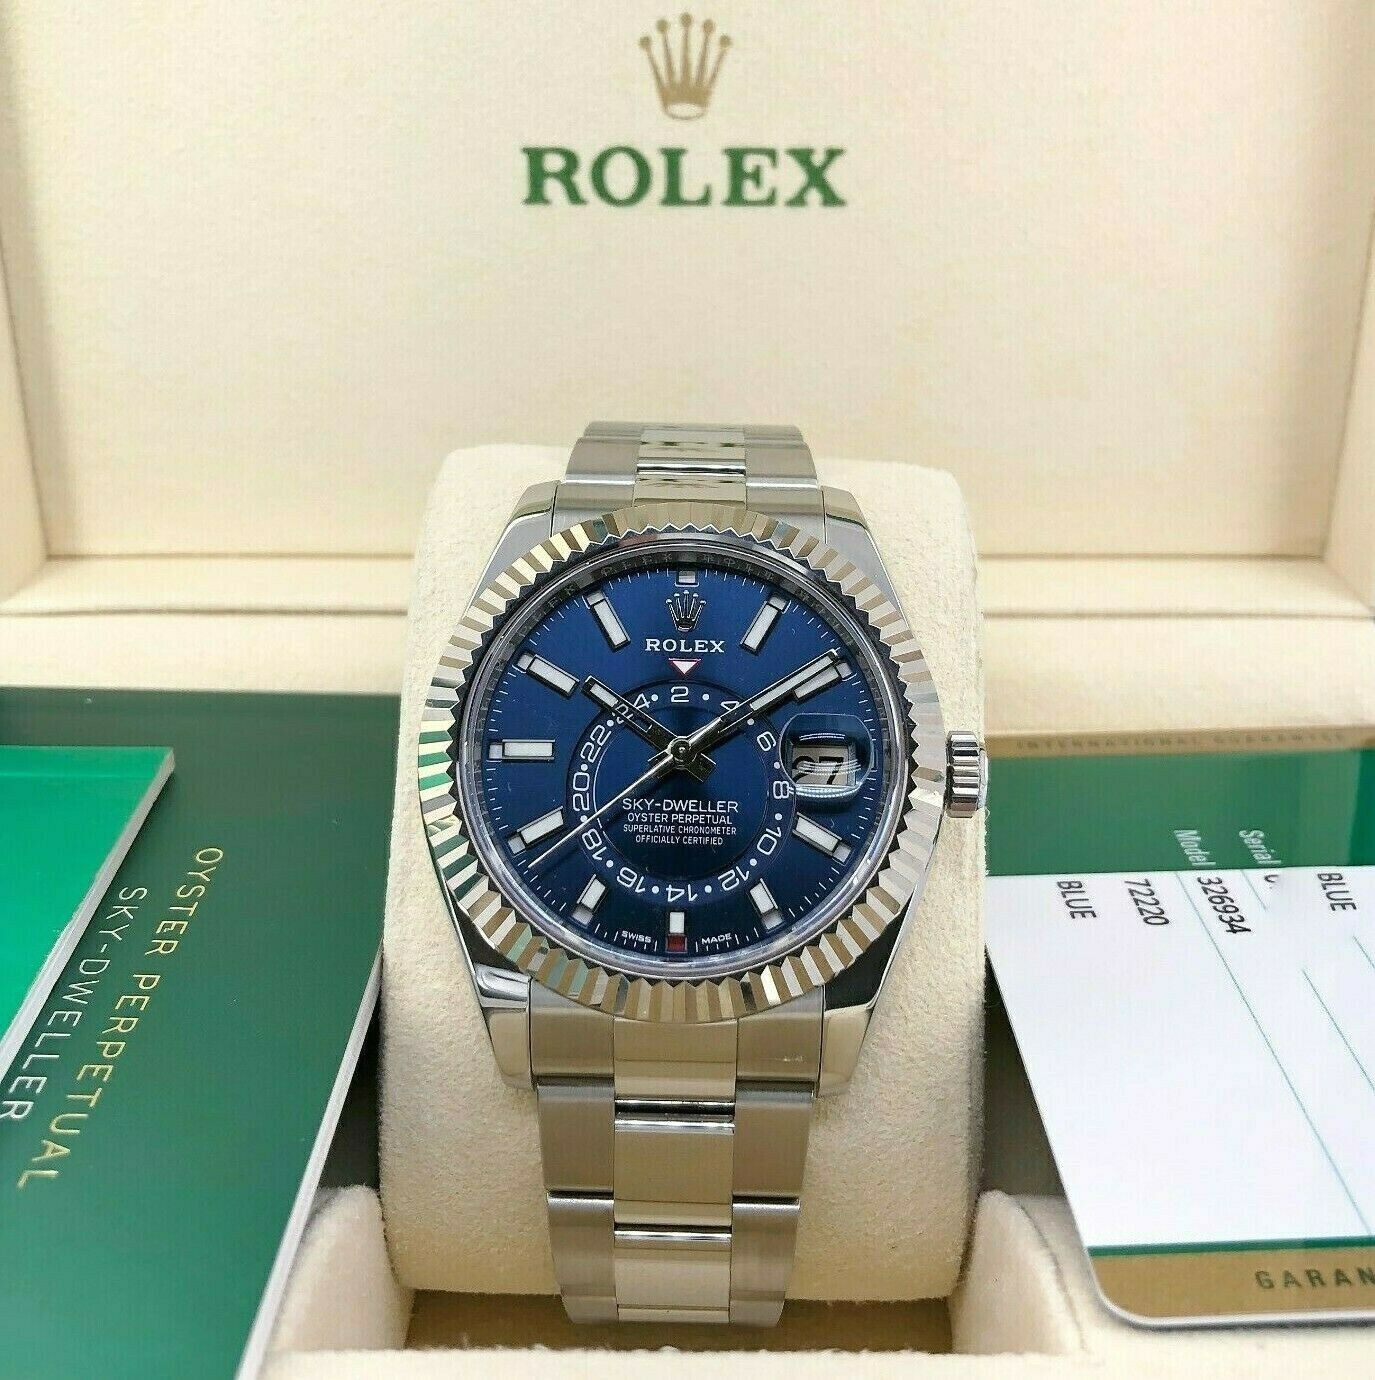 Rolex 42MM Sky- Dweller Watch 18K Gold Stainless Steel Ref # 326934 Box and Card